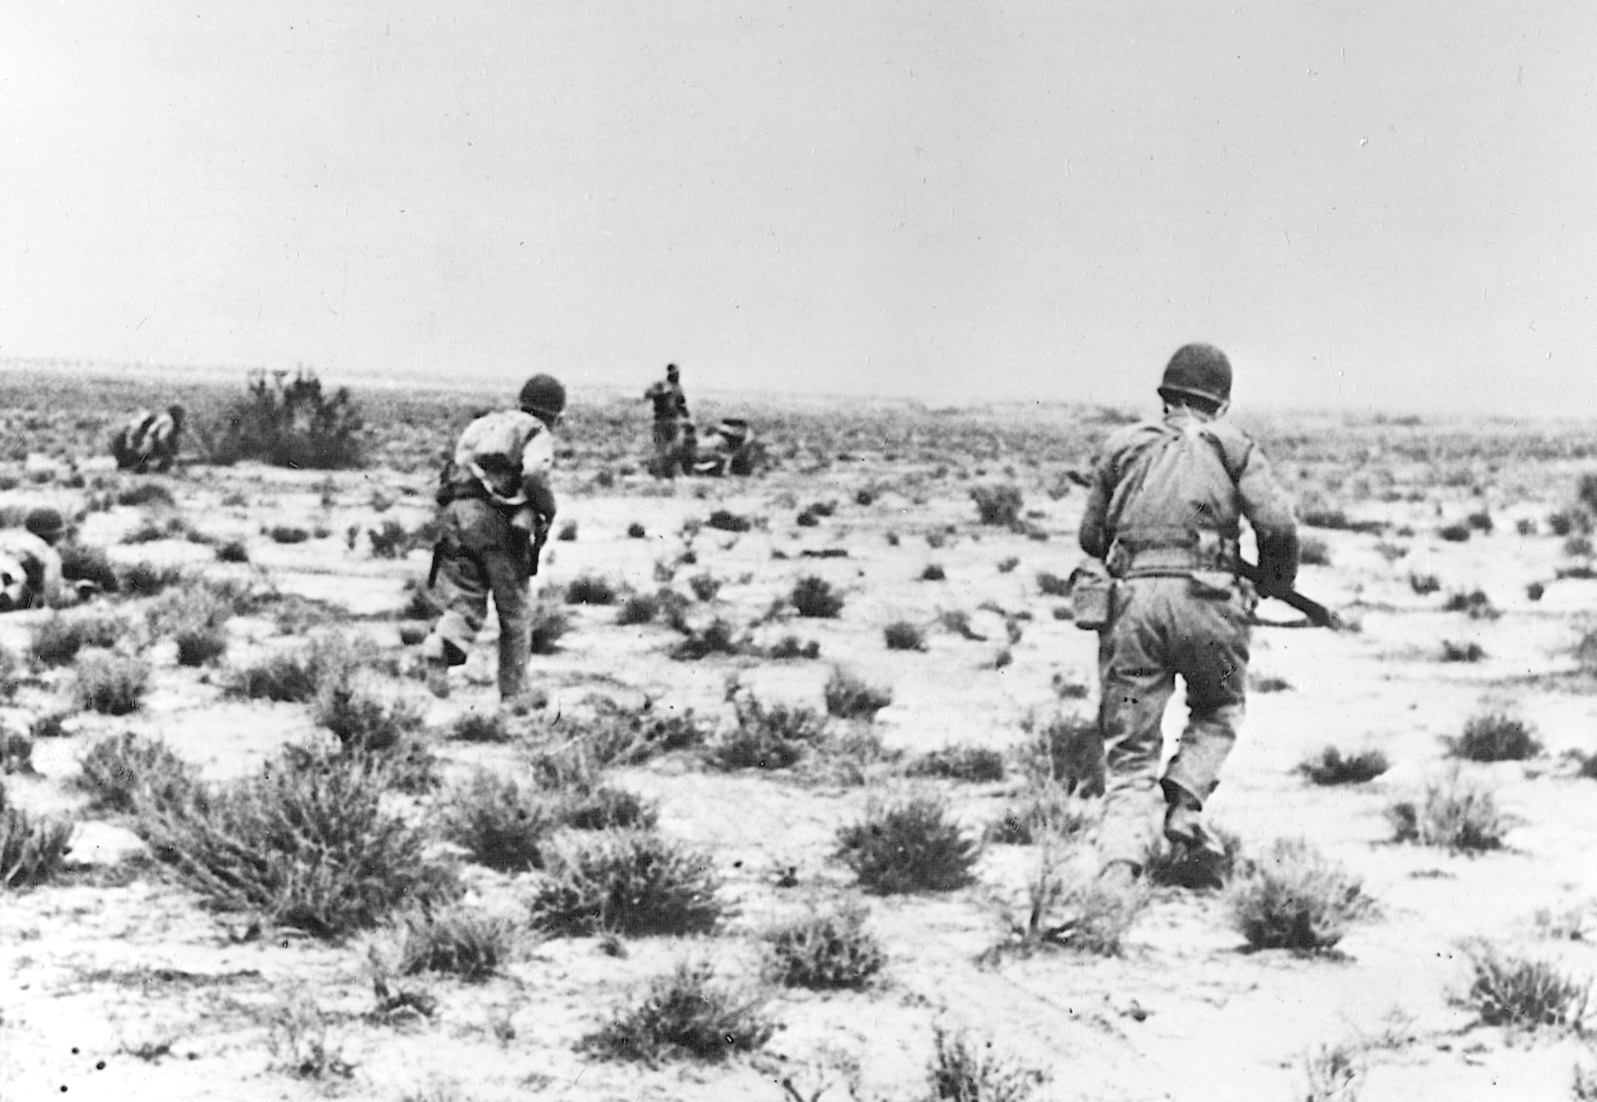 U.S. soldiers, weapons at the ready, advance warily toward German positions across the Tunisian desert.